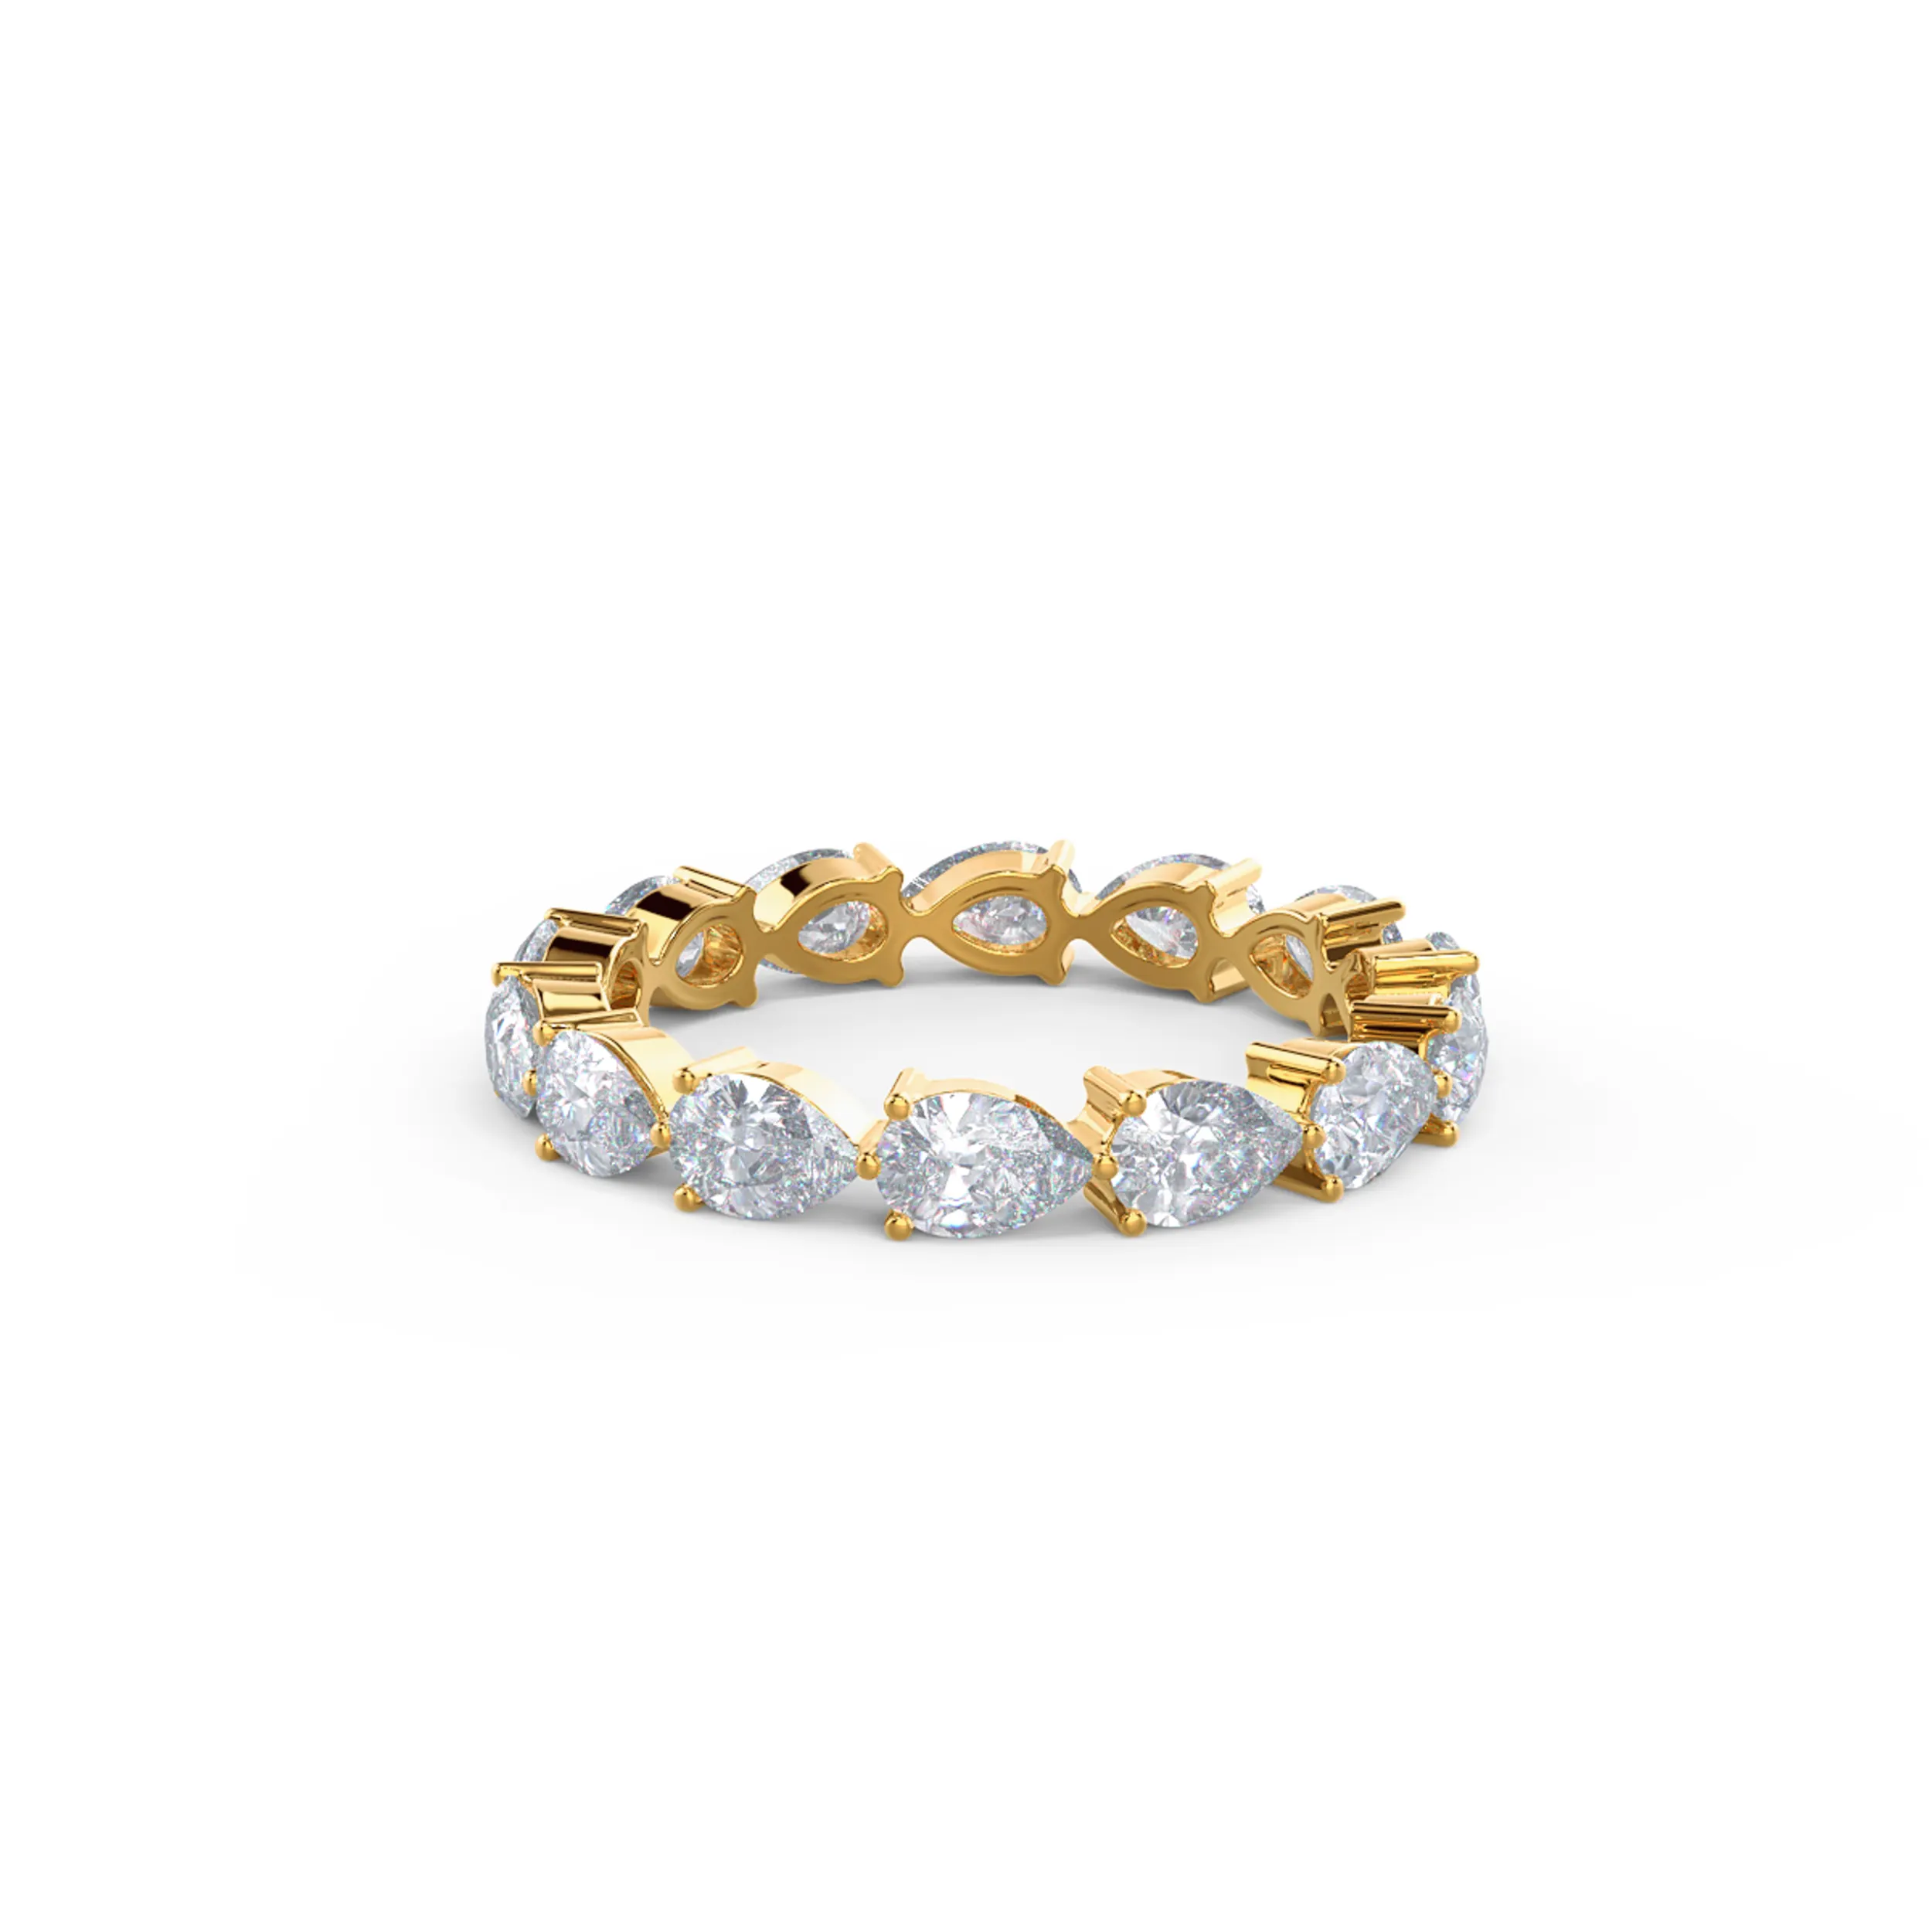 14k Yellow Gold Pear East-West Eternity Band featuring 2.0 Carat Lab Diamonds (Main View)